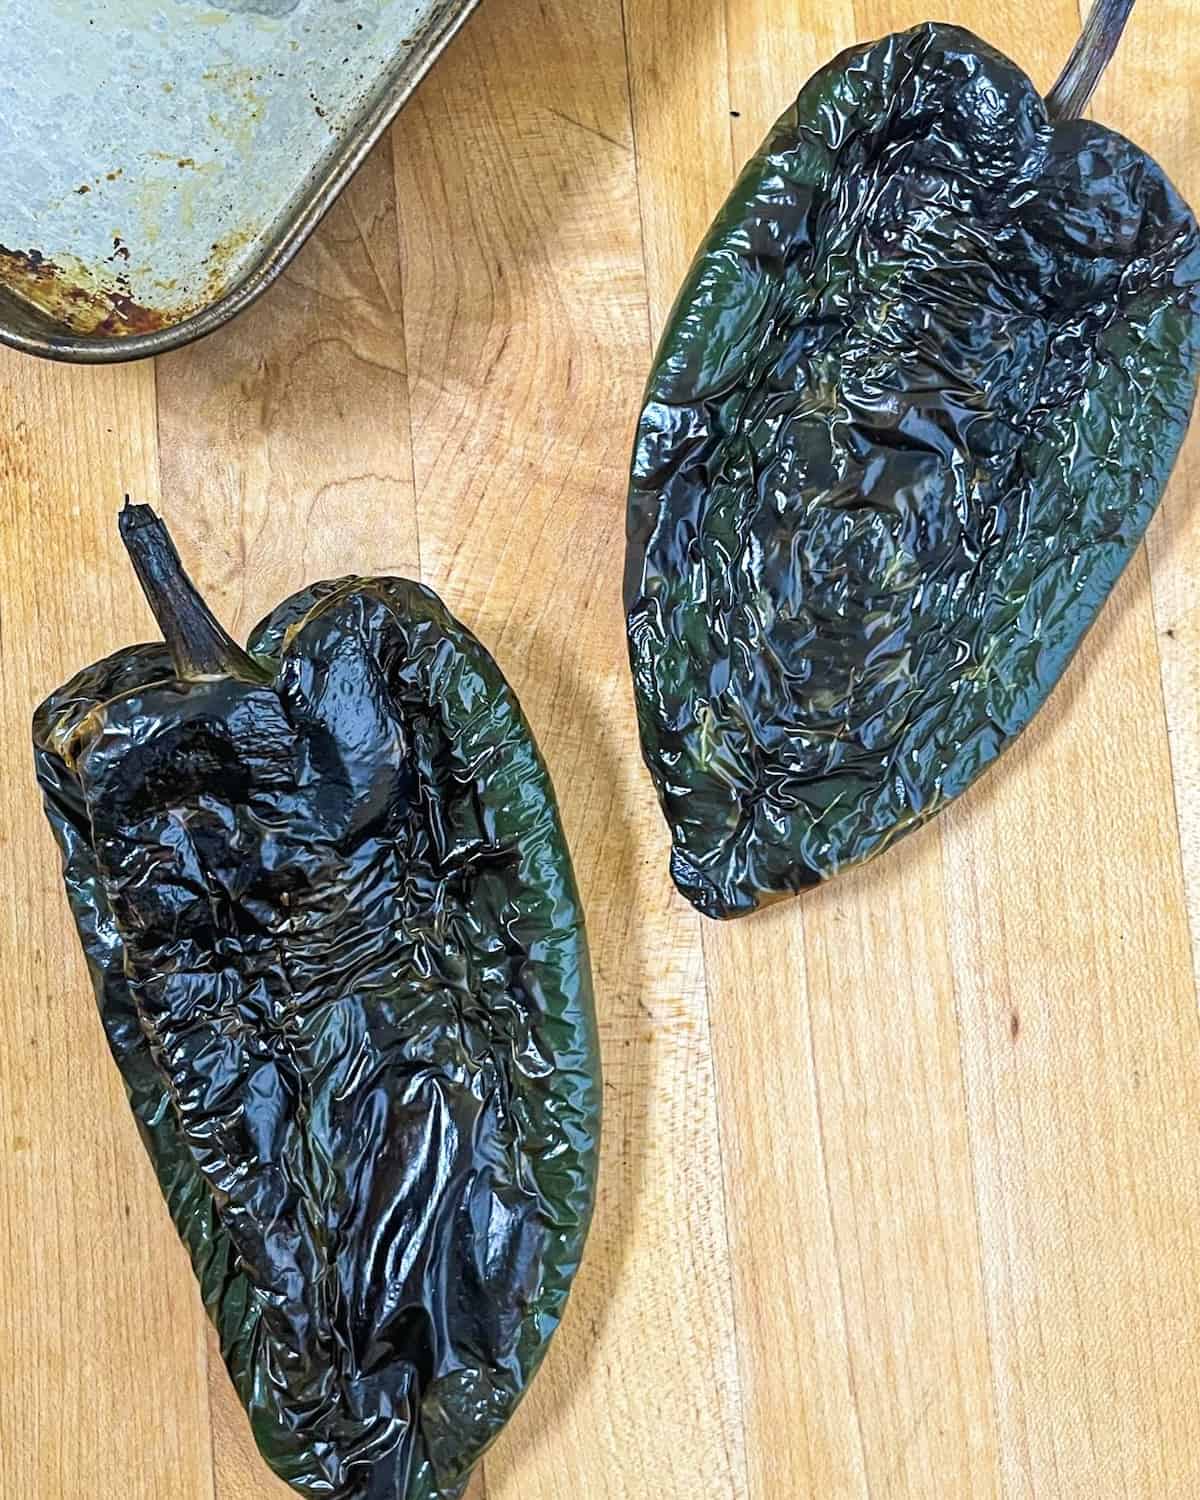 two poblano peppers that have been broiled until blackened on all sides